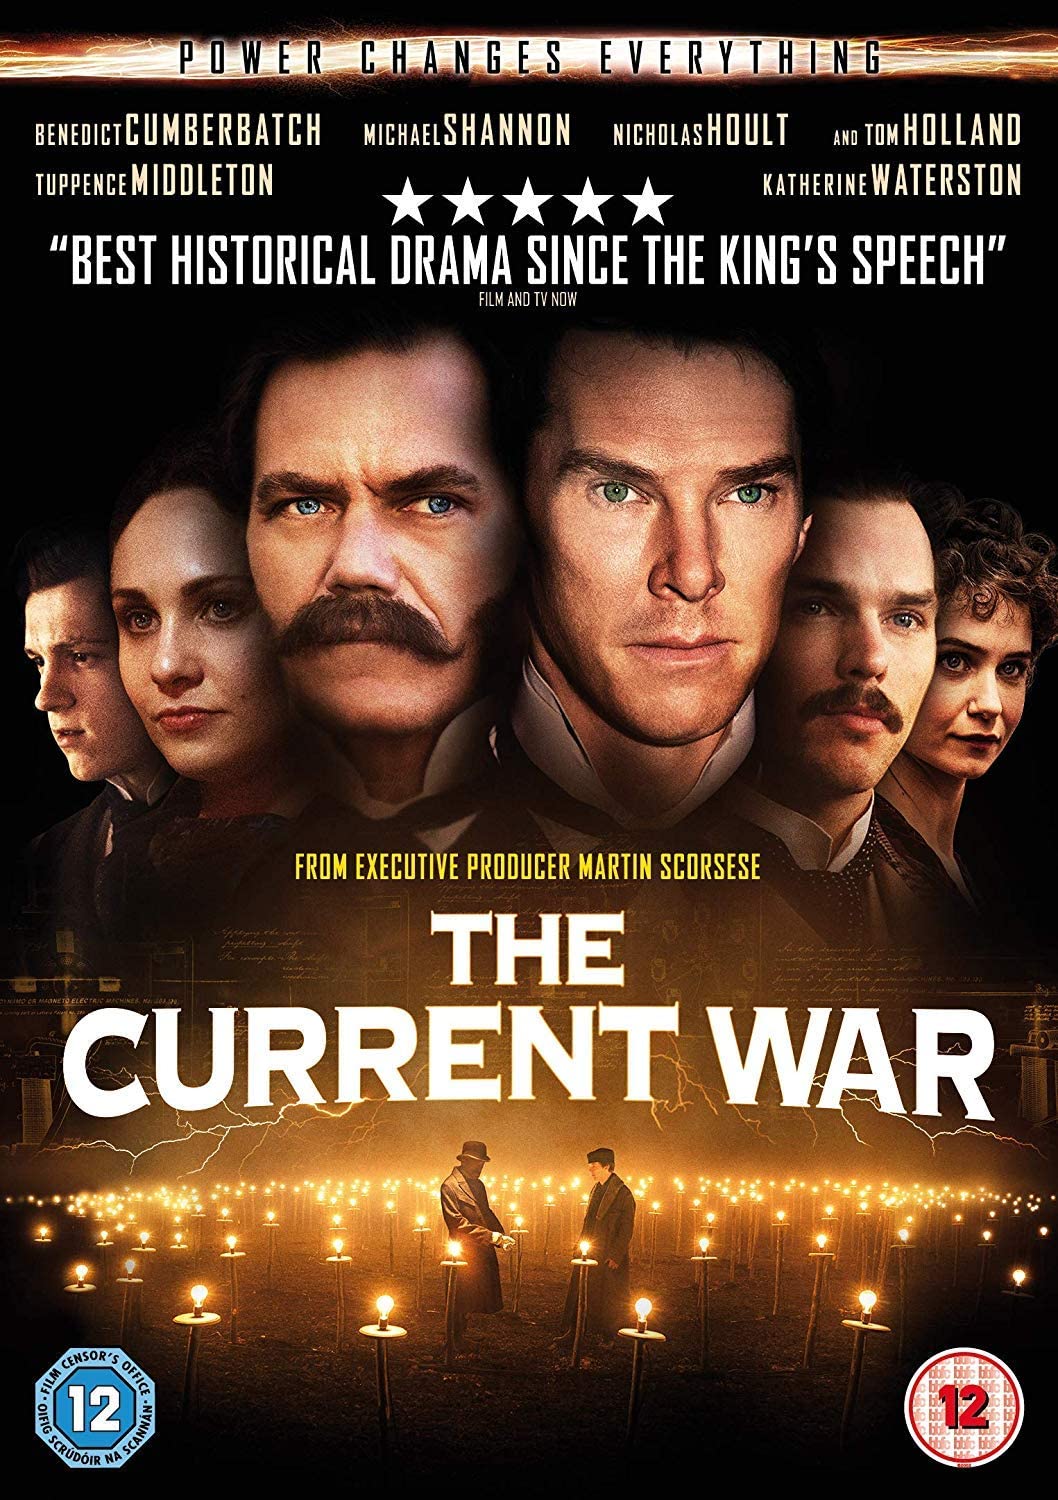 The Current War [2019] - Drama/History [DVD]